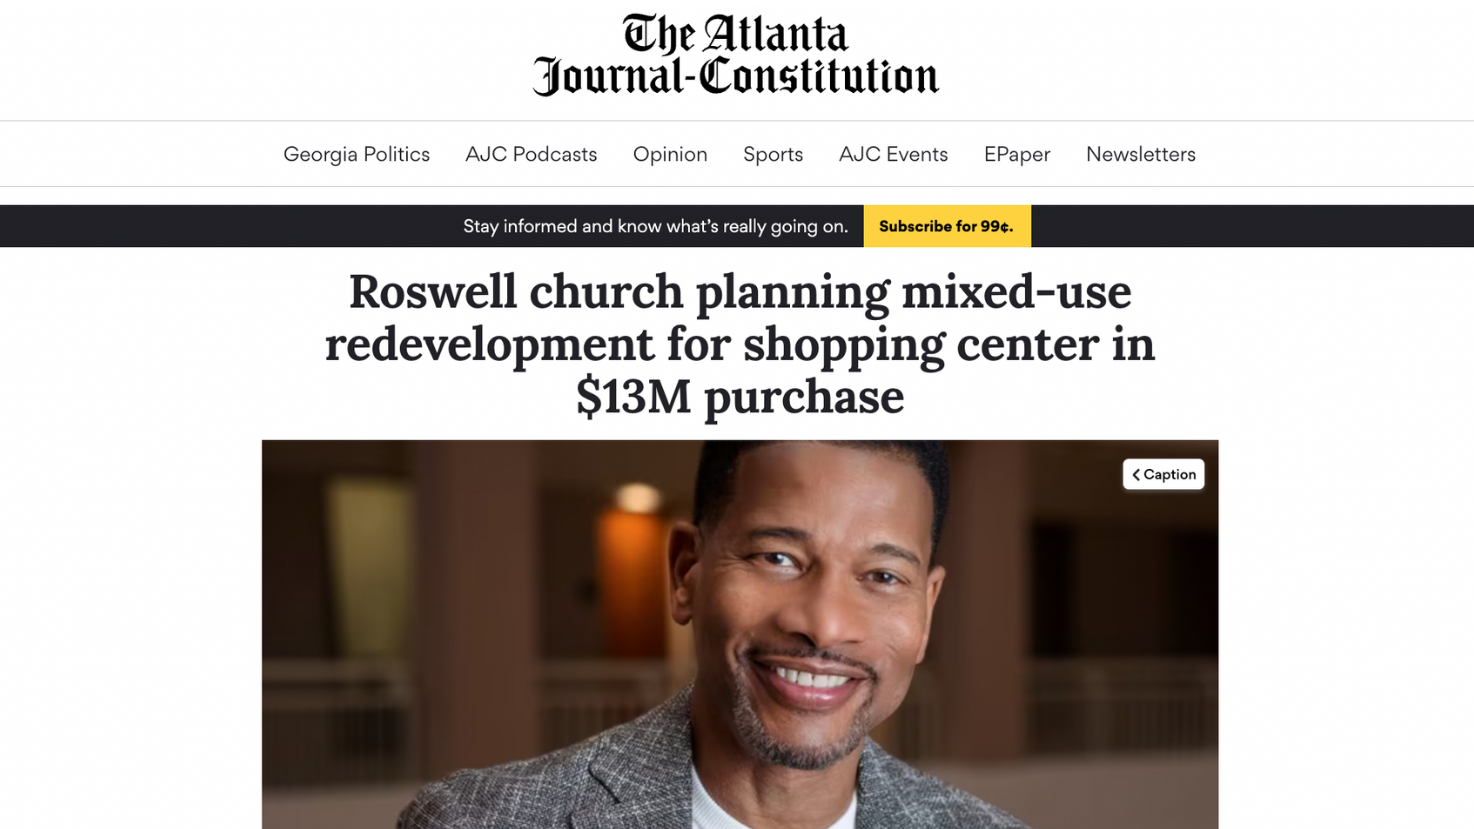 Roswell church planning mixed-use redevelopment for shopping center in $13M purchase